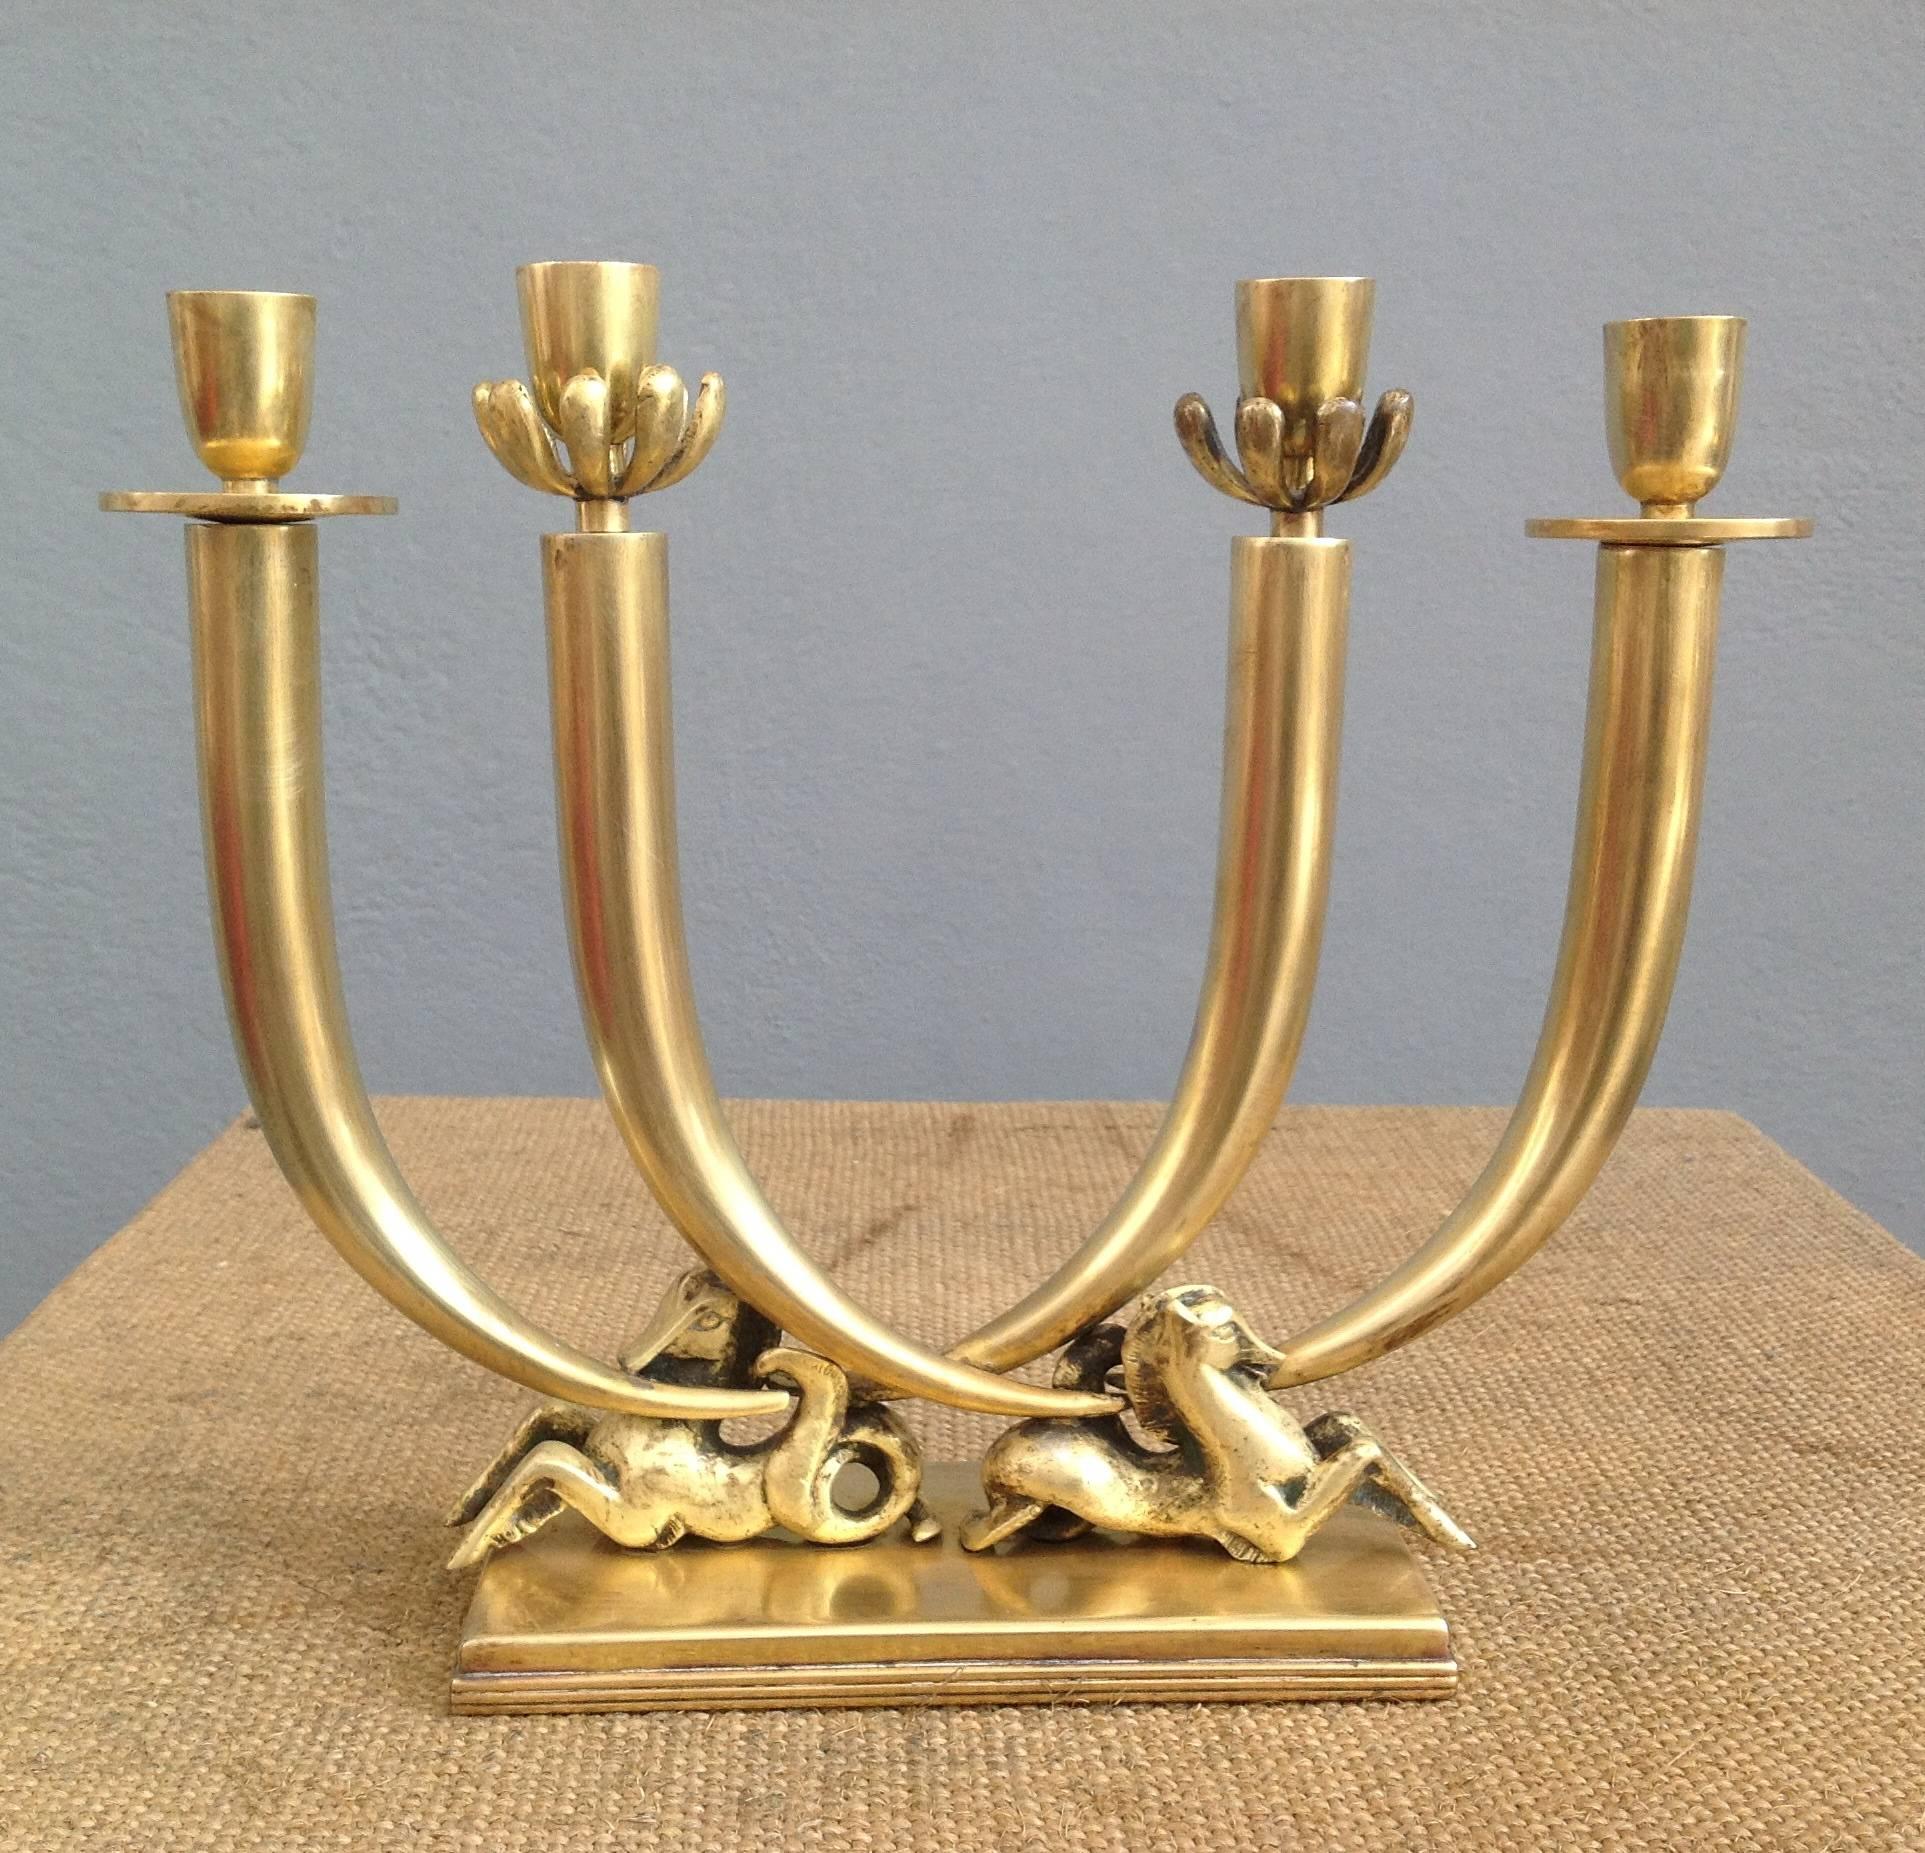 Italian Rare Pair of Candle Holders in the Manner of Gio Ponti